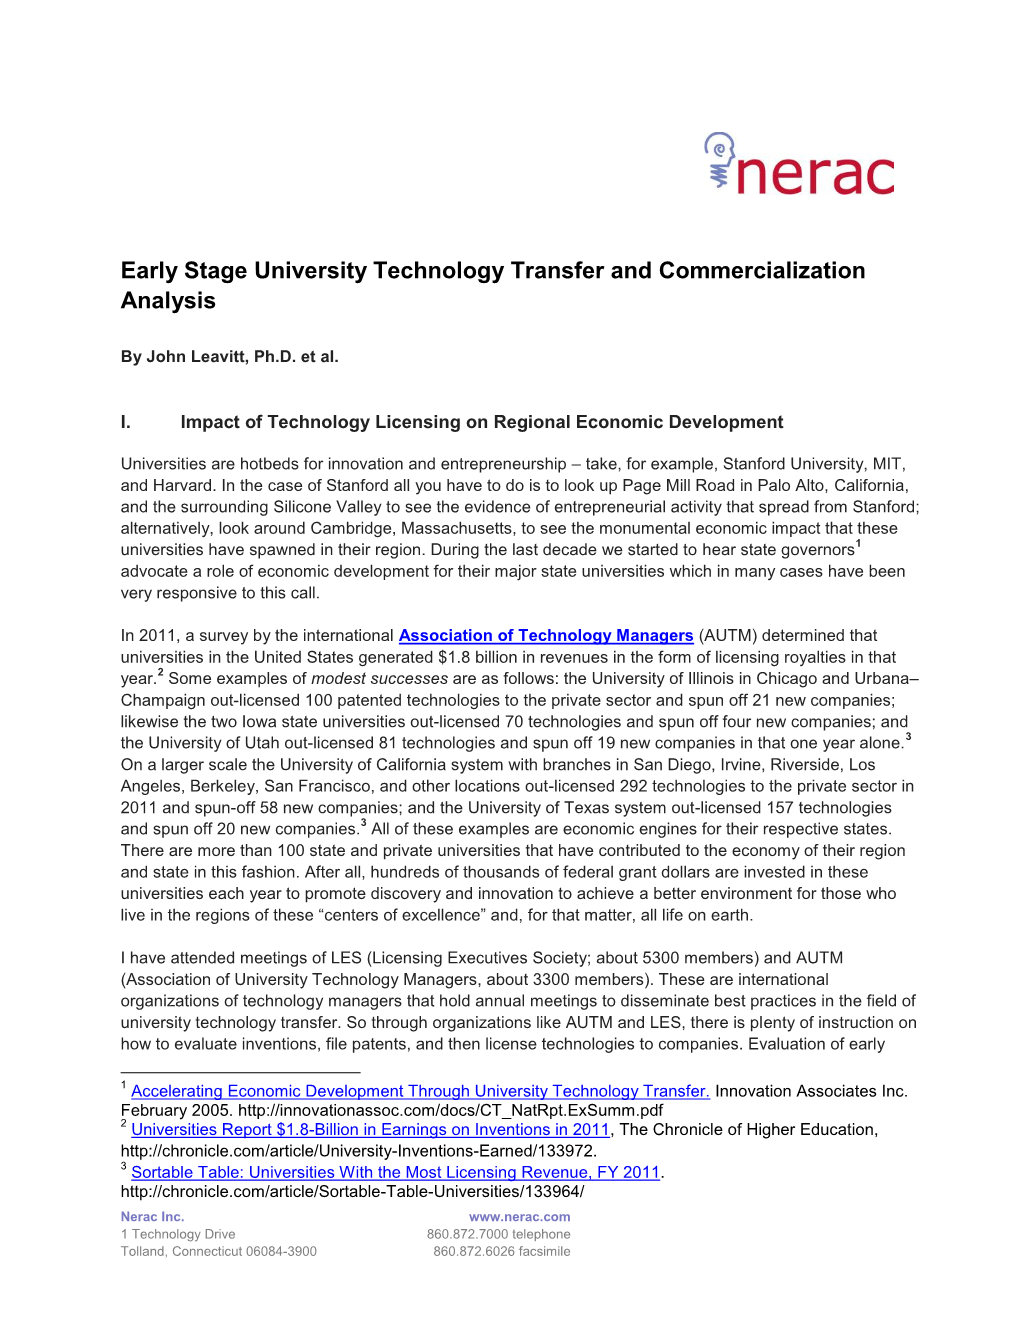 Early Stage University Technology Transfer and Commercialization Analysis